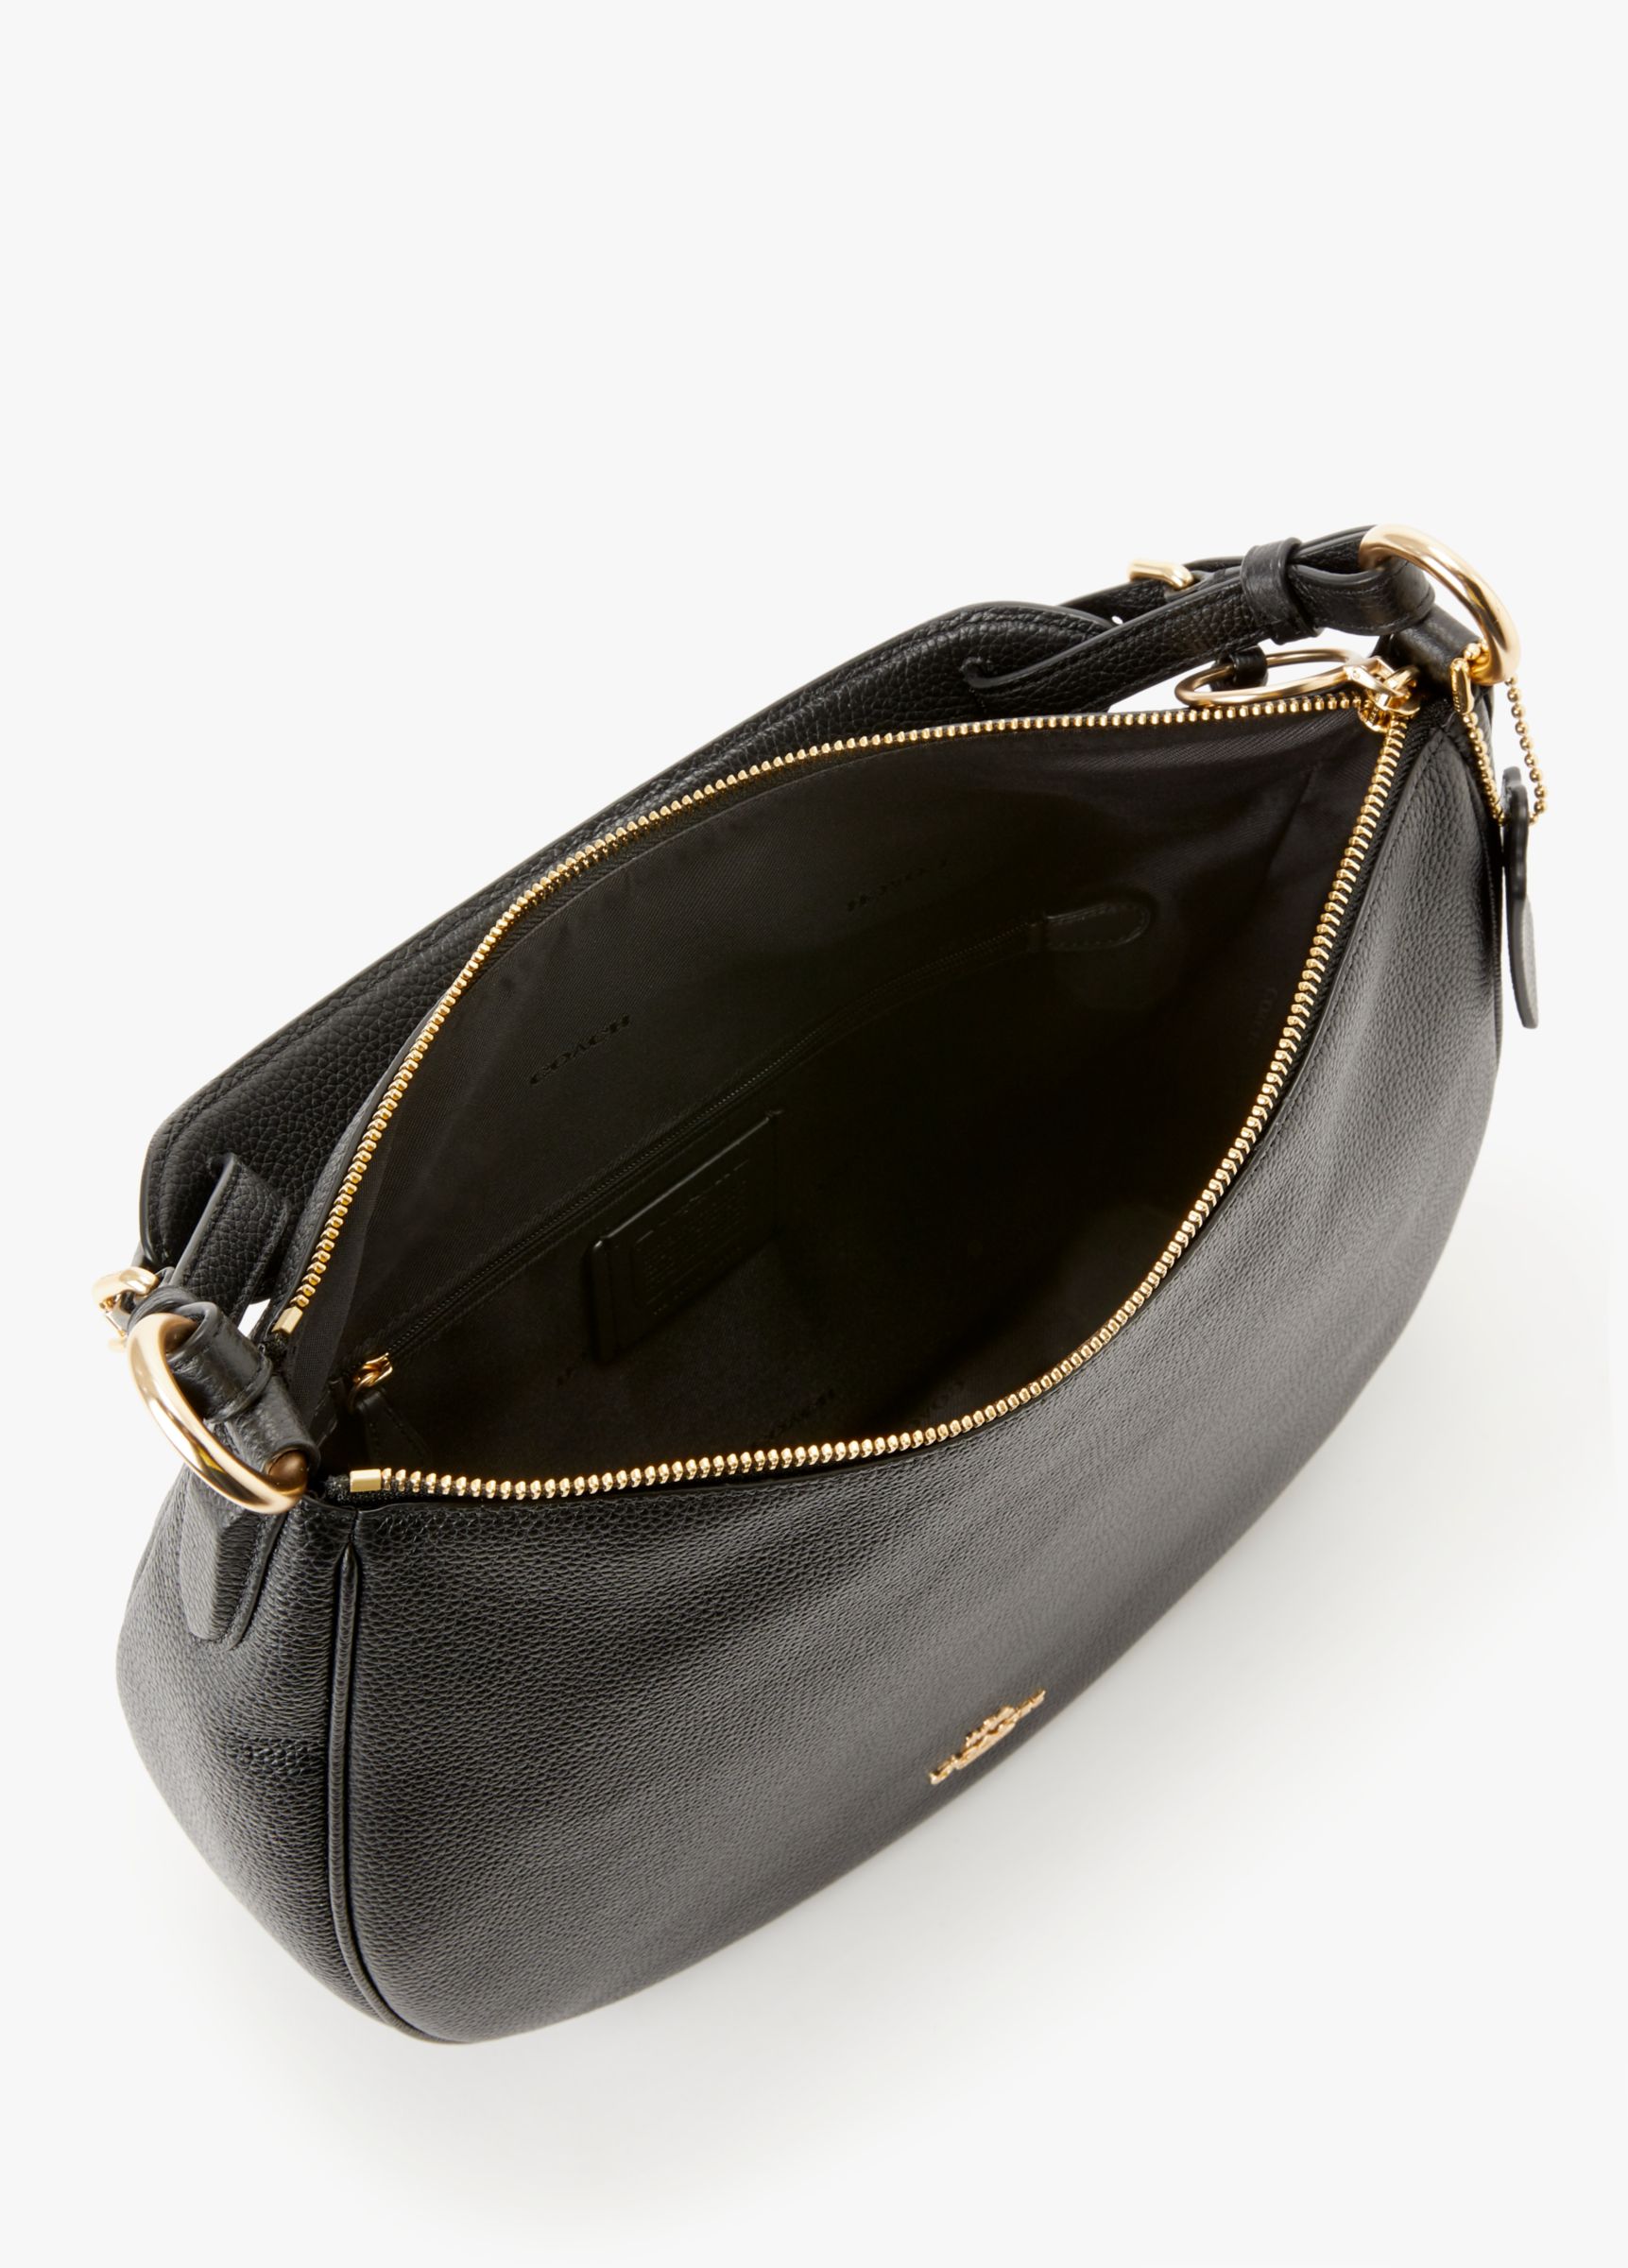 Coach Sutton Pebbled Leather Hobo Bag, Black at John Lewis & Partners